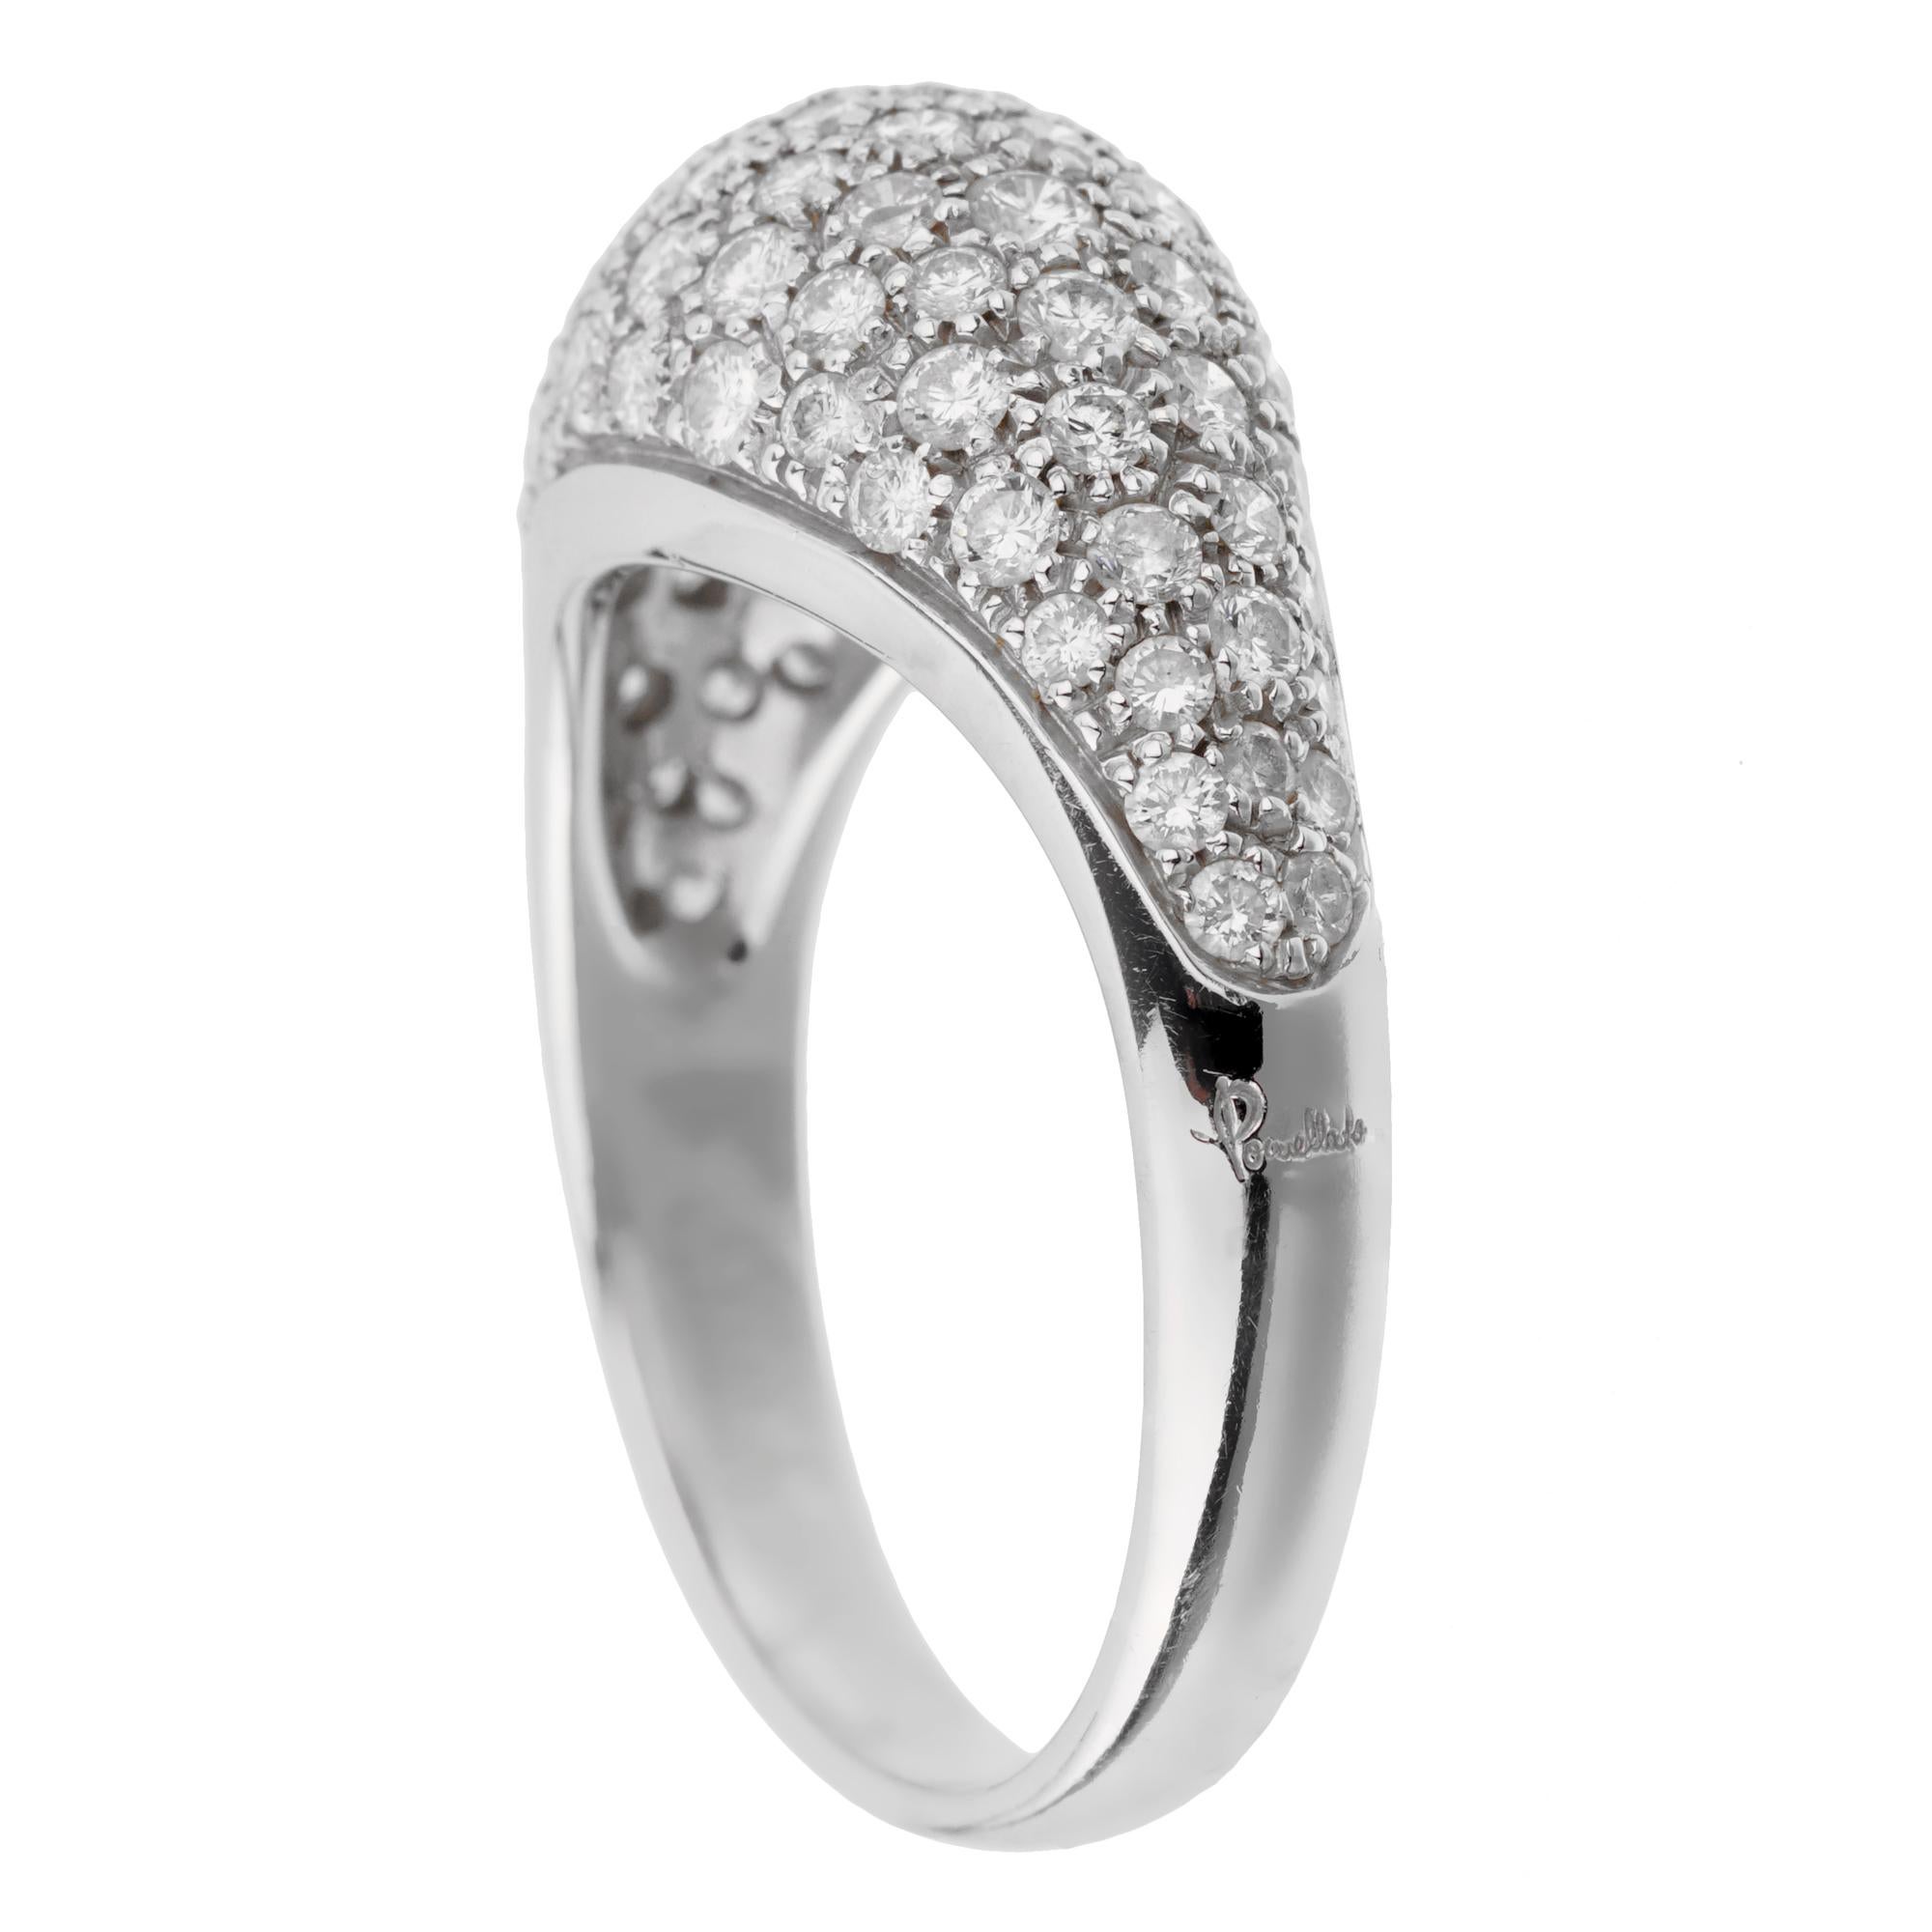 A timeless Pomellato cocktail ring in a bombe design showcasing round brilliant cut diamonds in shimmering 18k white gold. The ring measures a size 9 1/4 and can be resized.